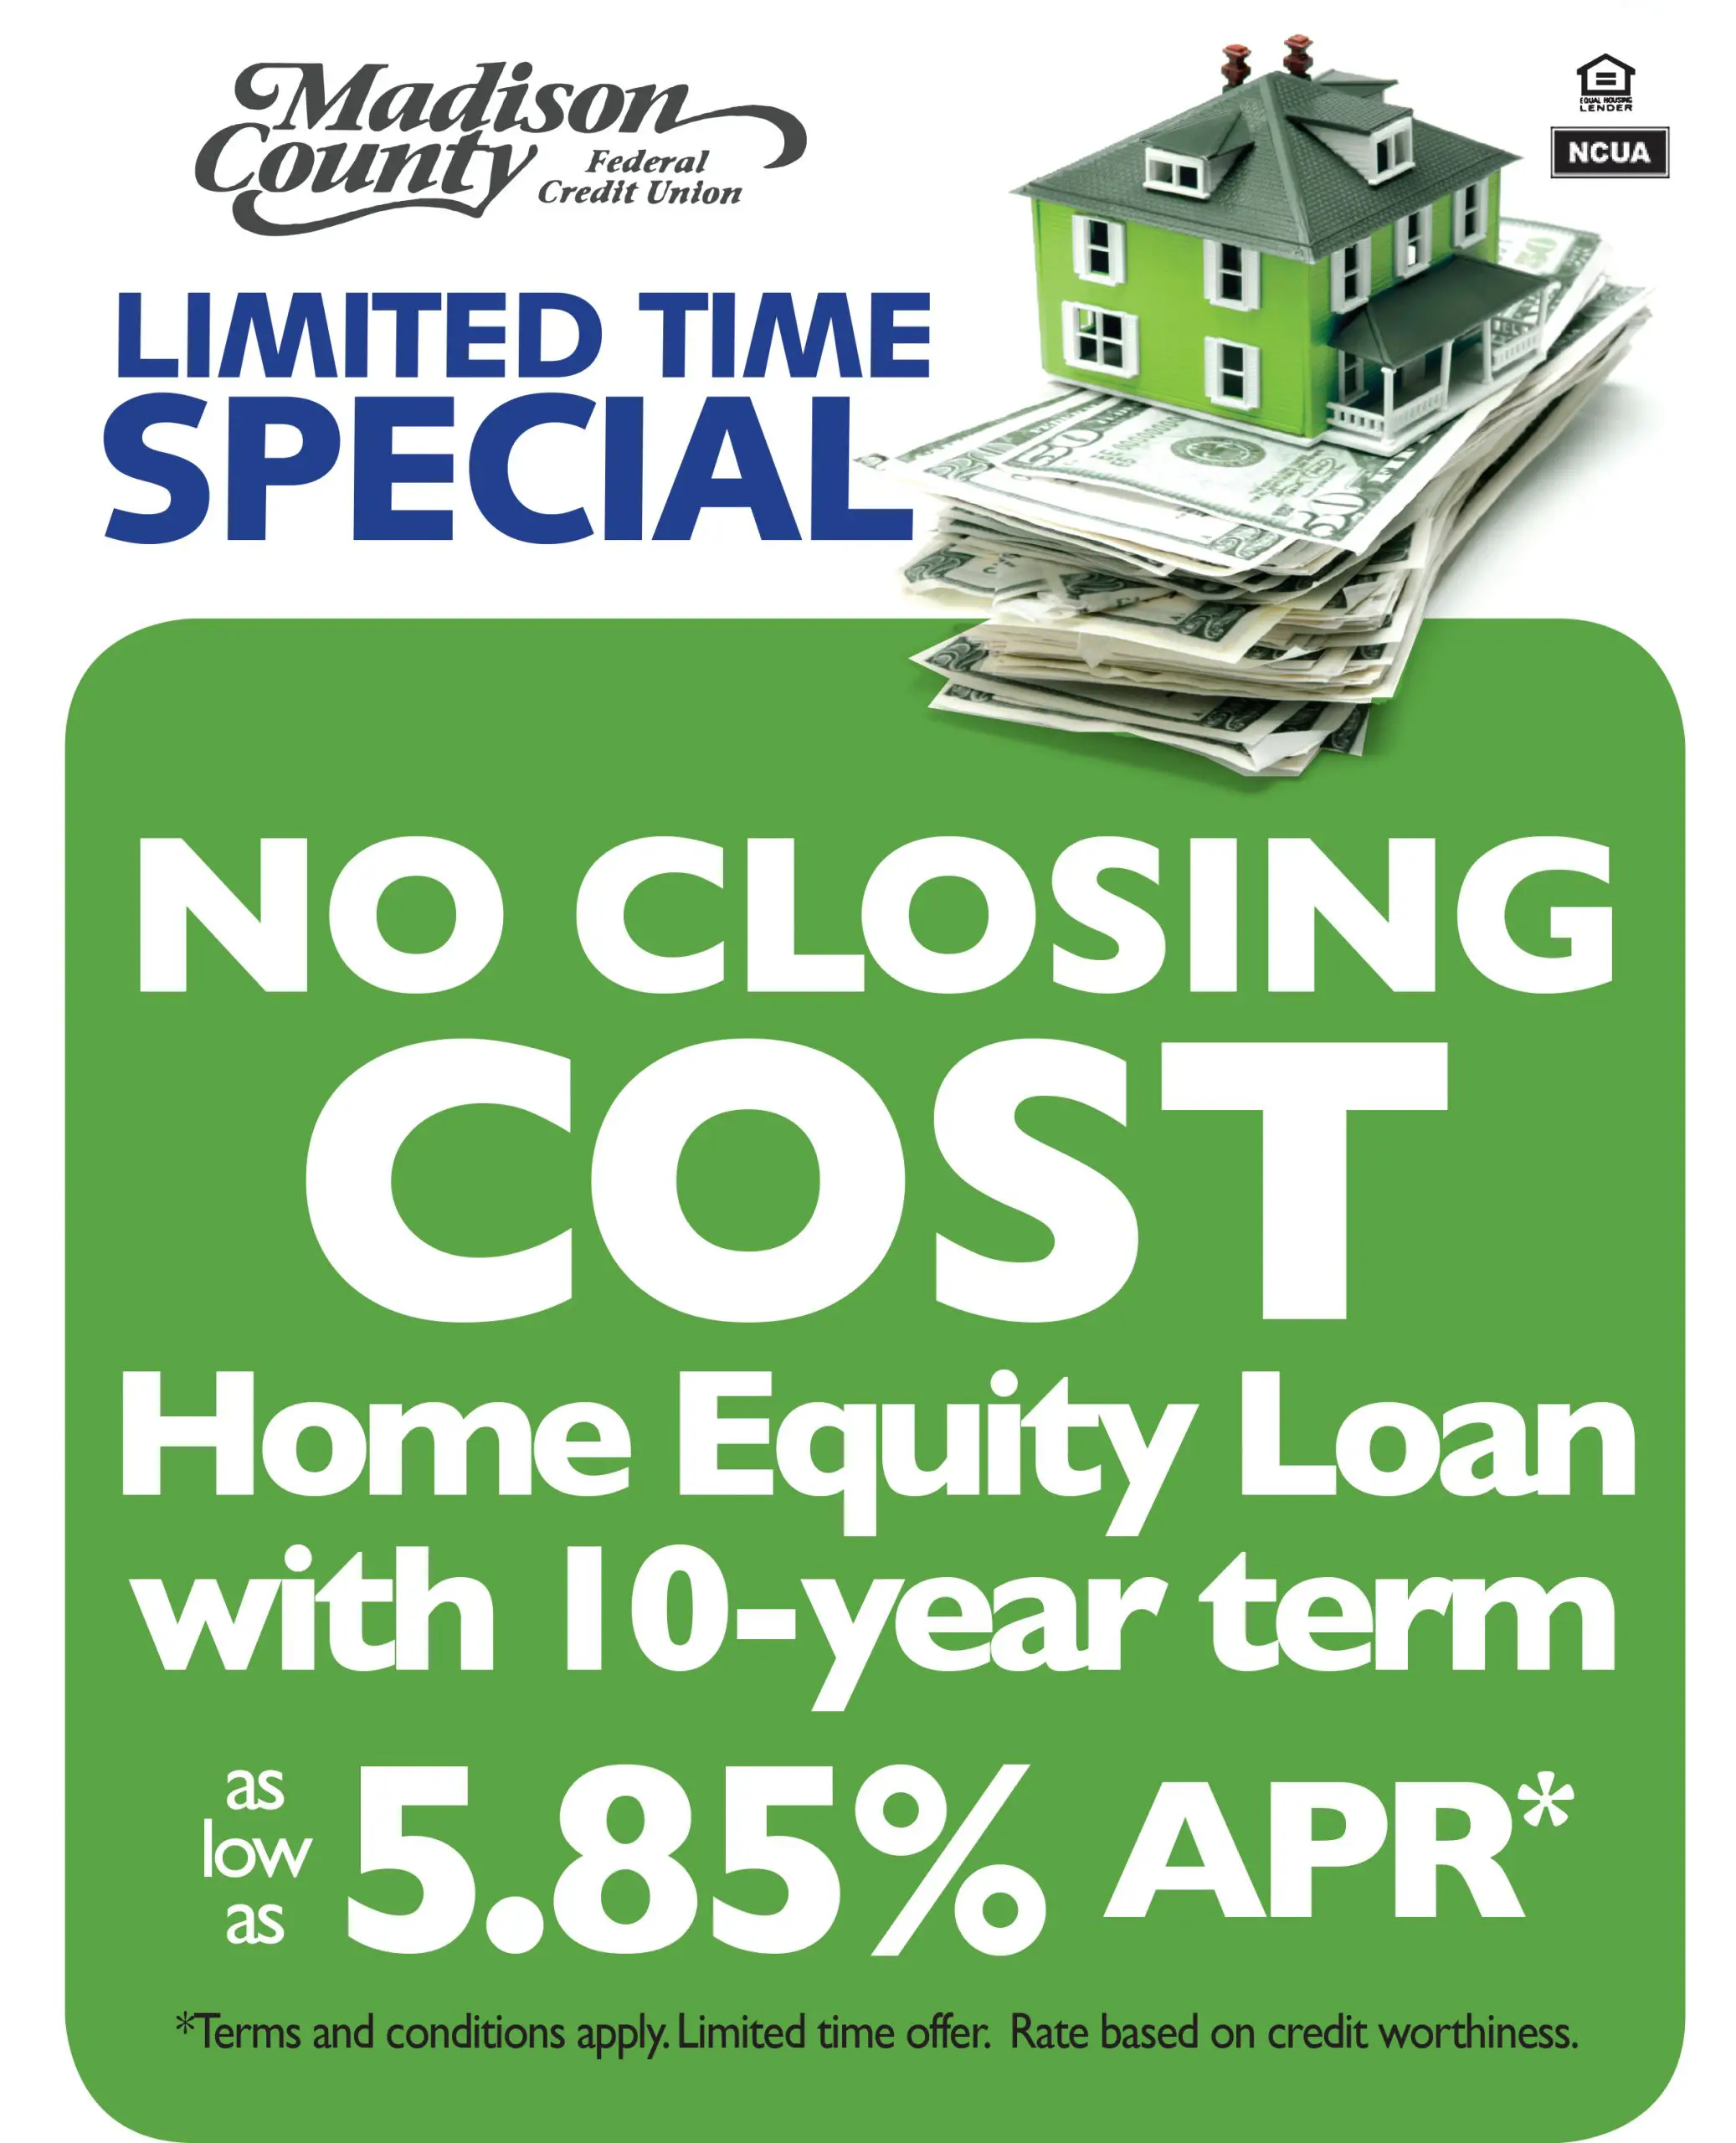 Madison County Federal Credit Union Â» Limited Time Home Equity Special